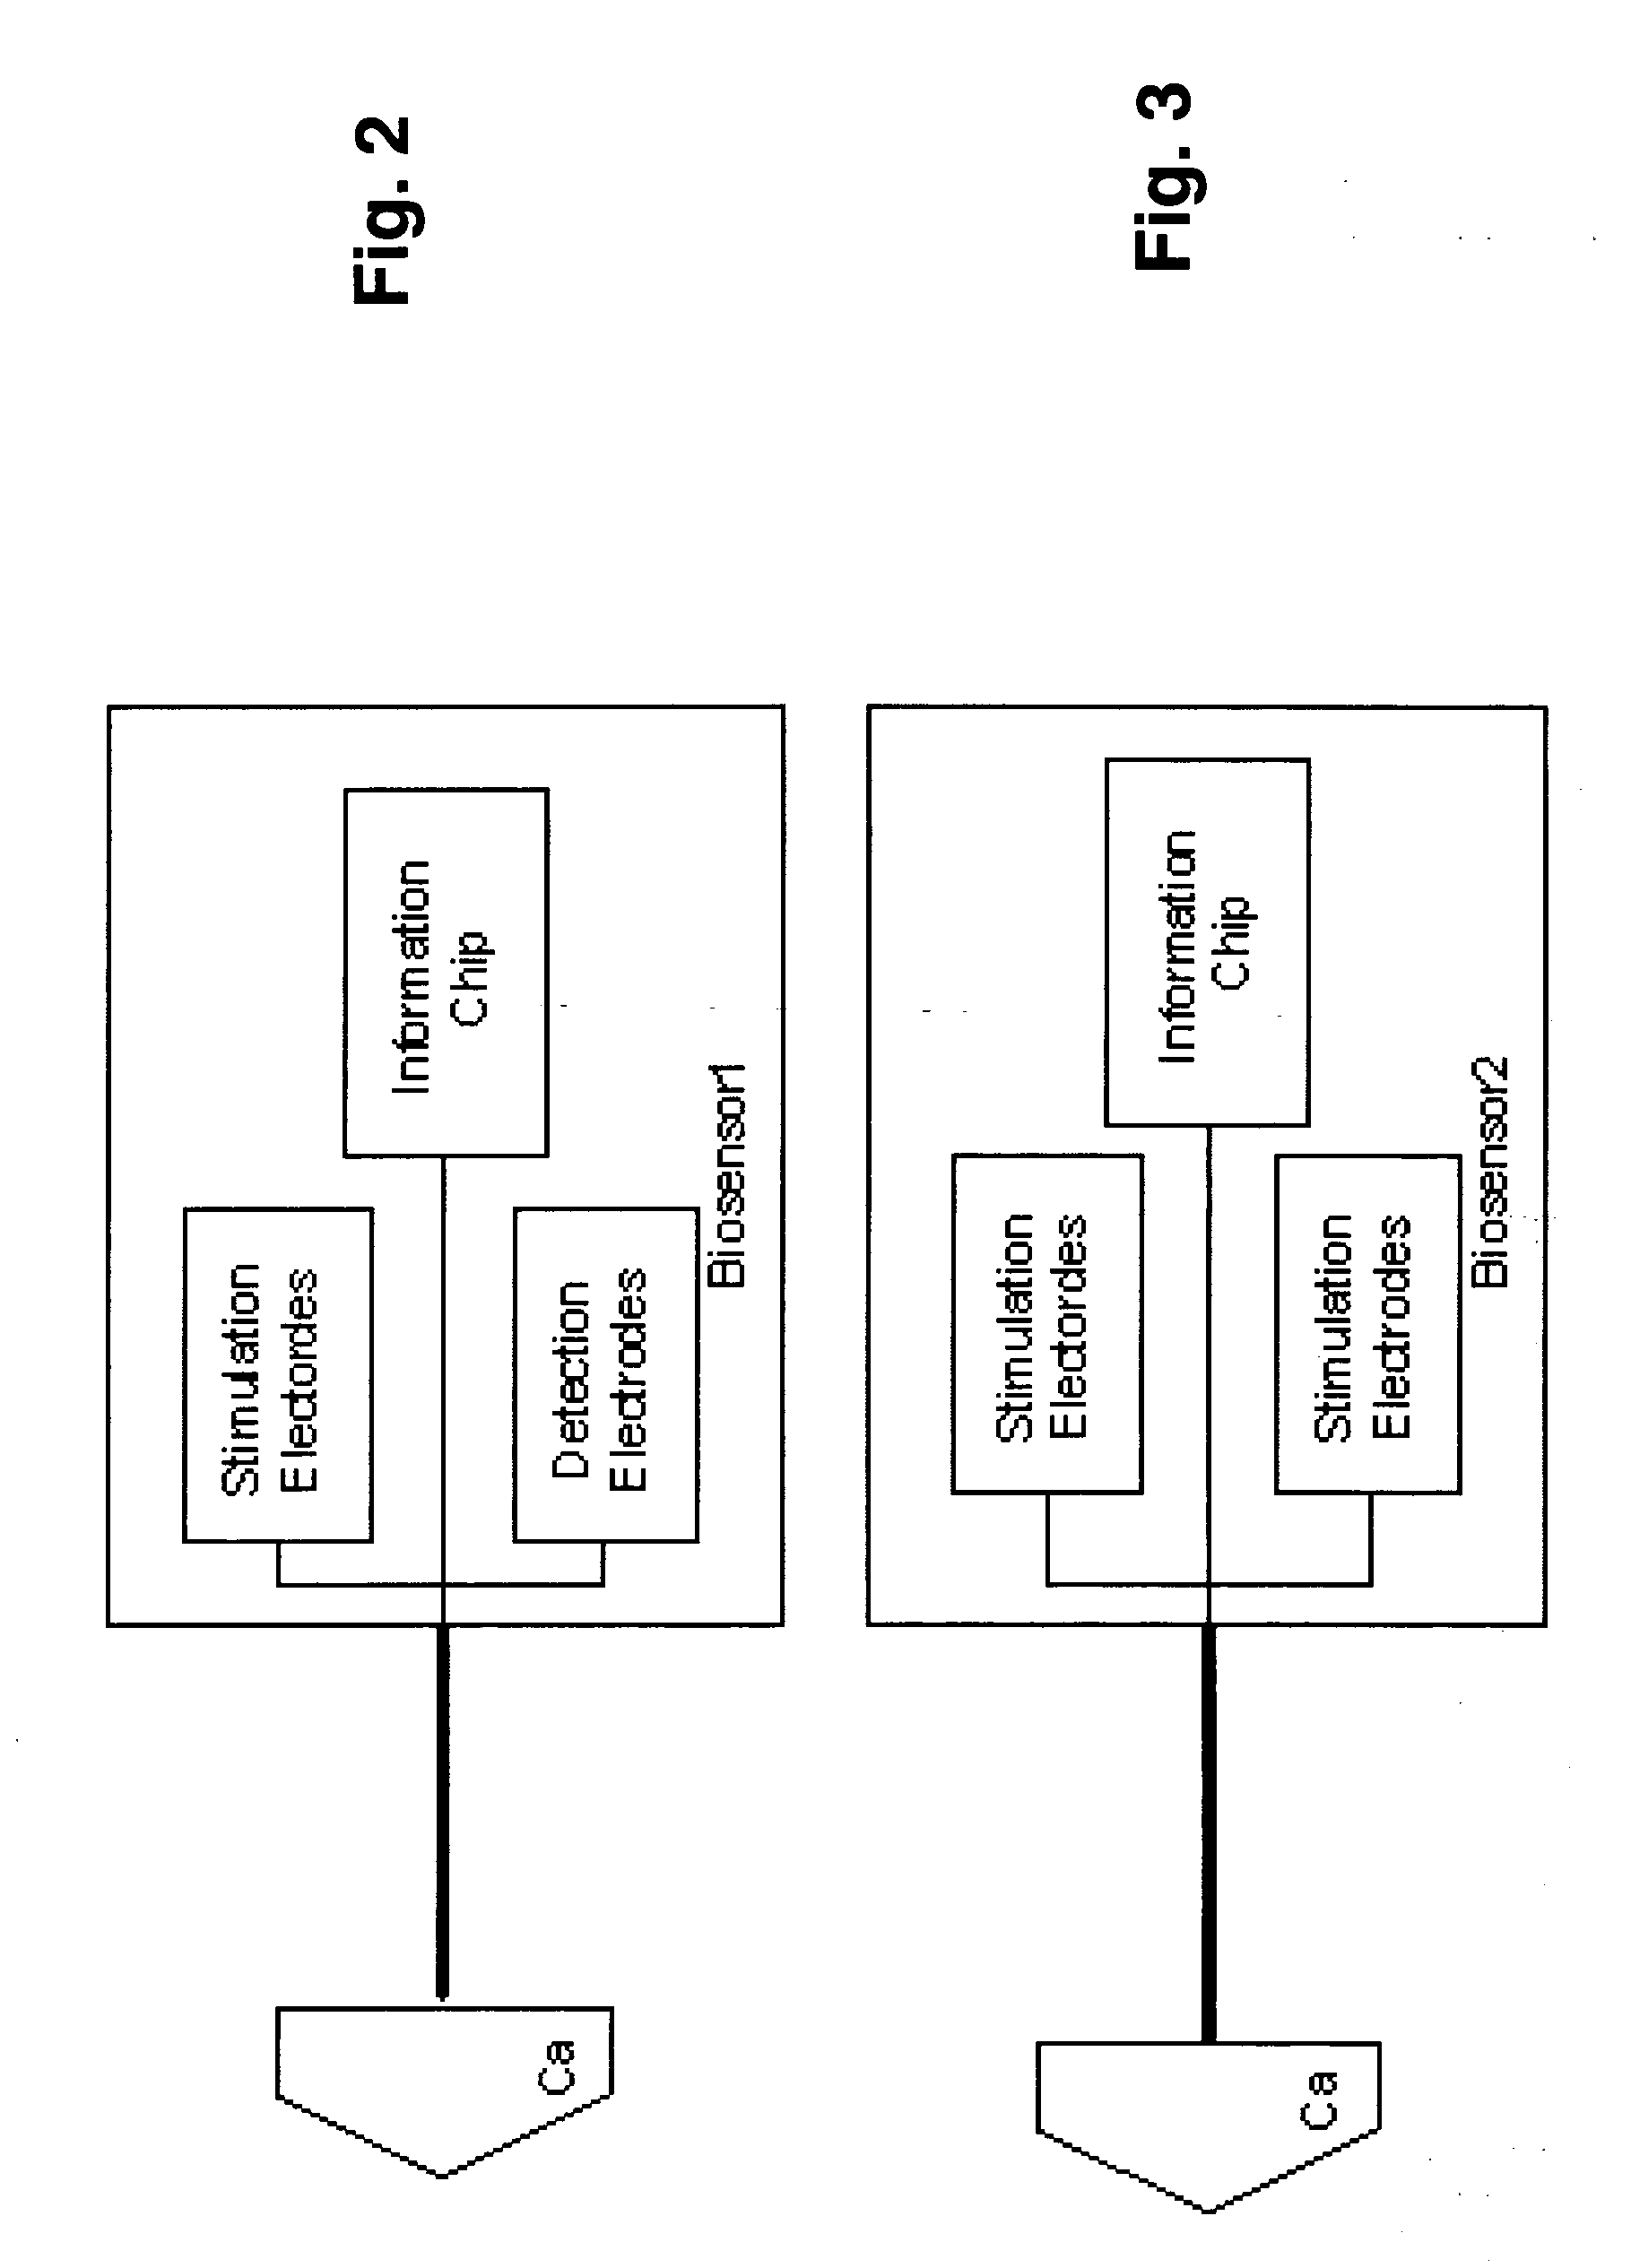 Apparatus and method for performing nerve conduction studies with multiple neuromuscular electrodes